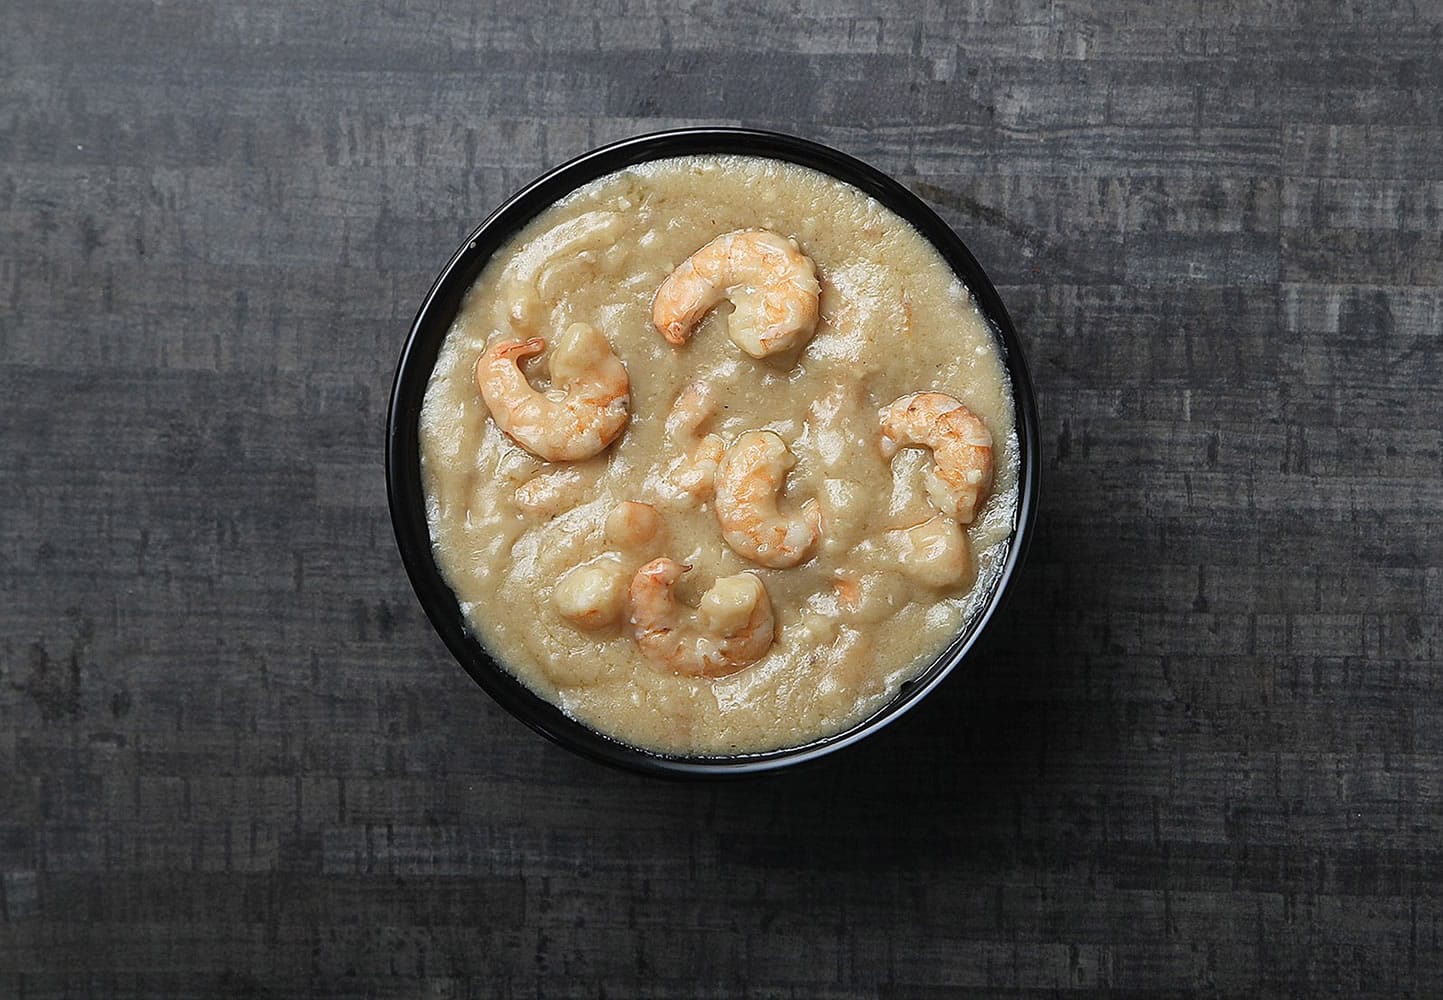 Dress up classic grits by adding sweet or savory toppings, such as shrimp and gravy.